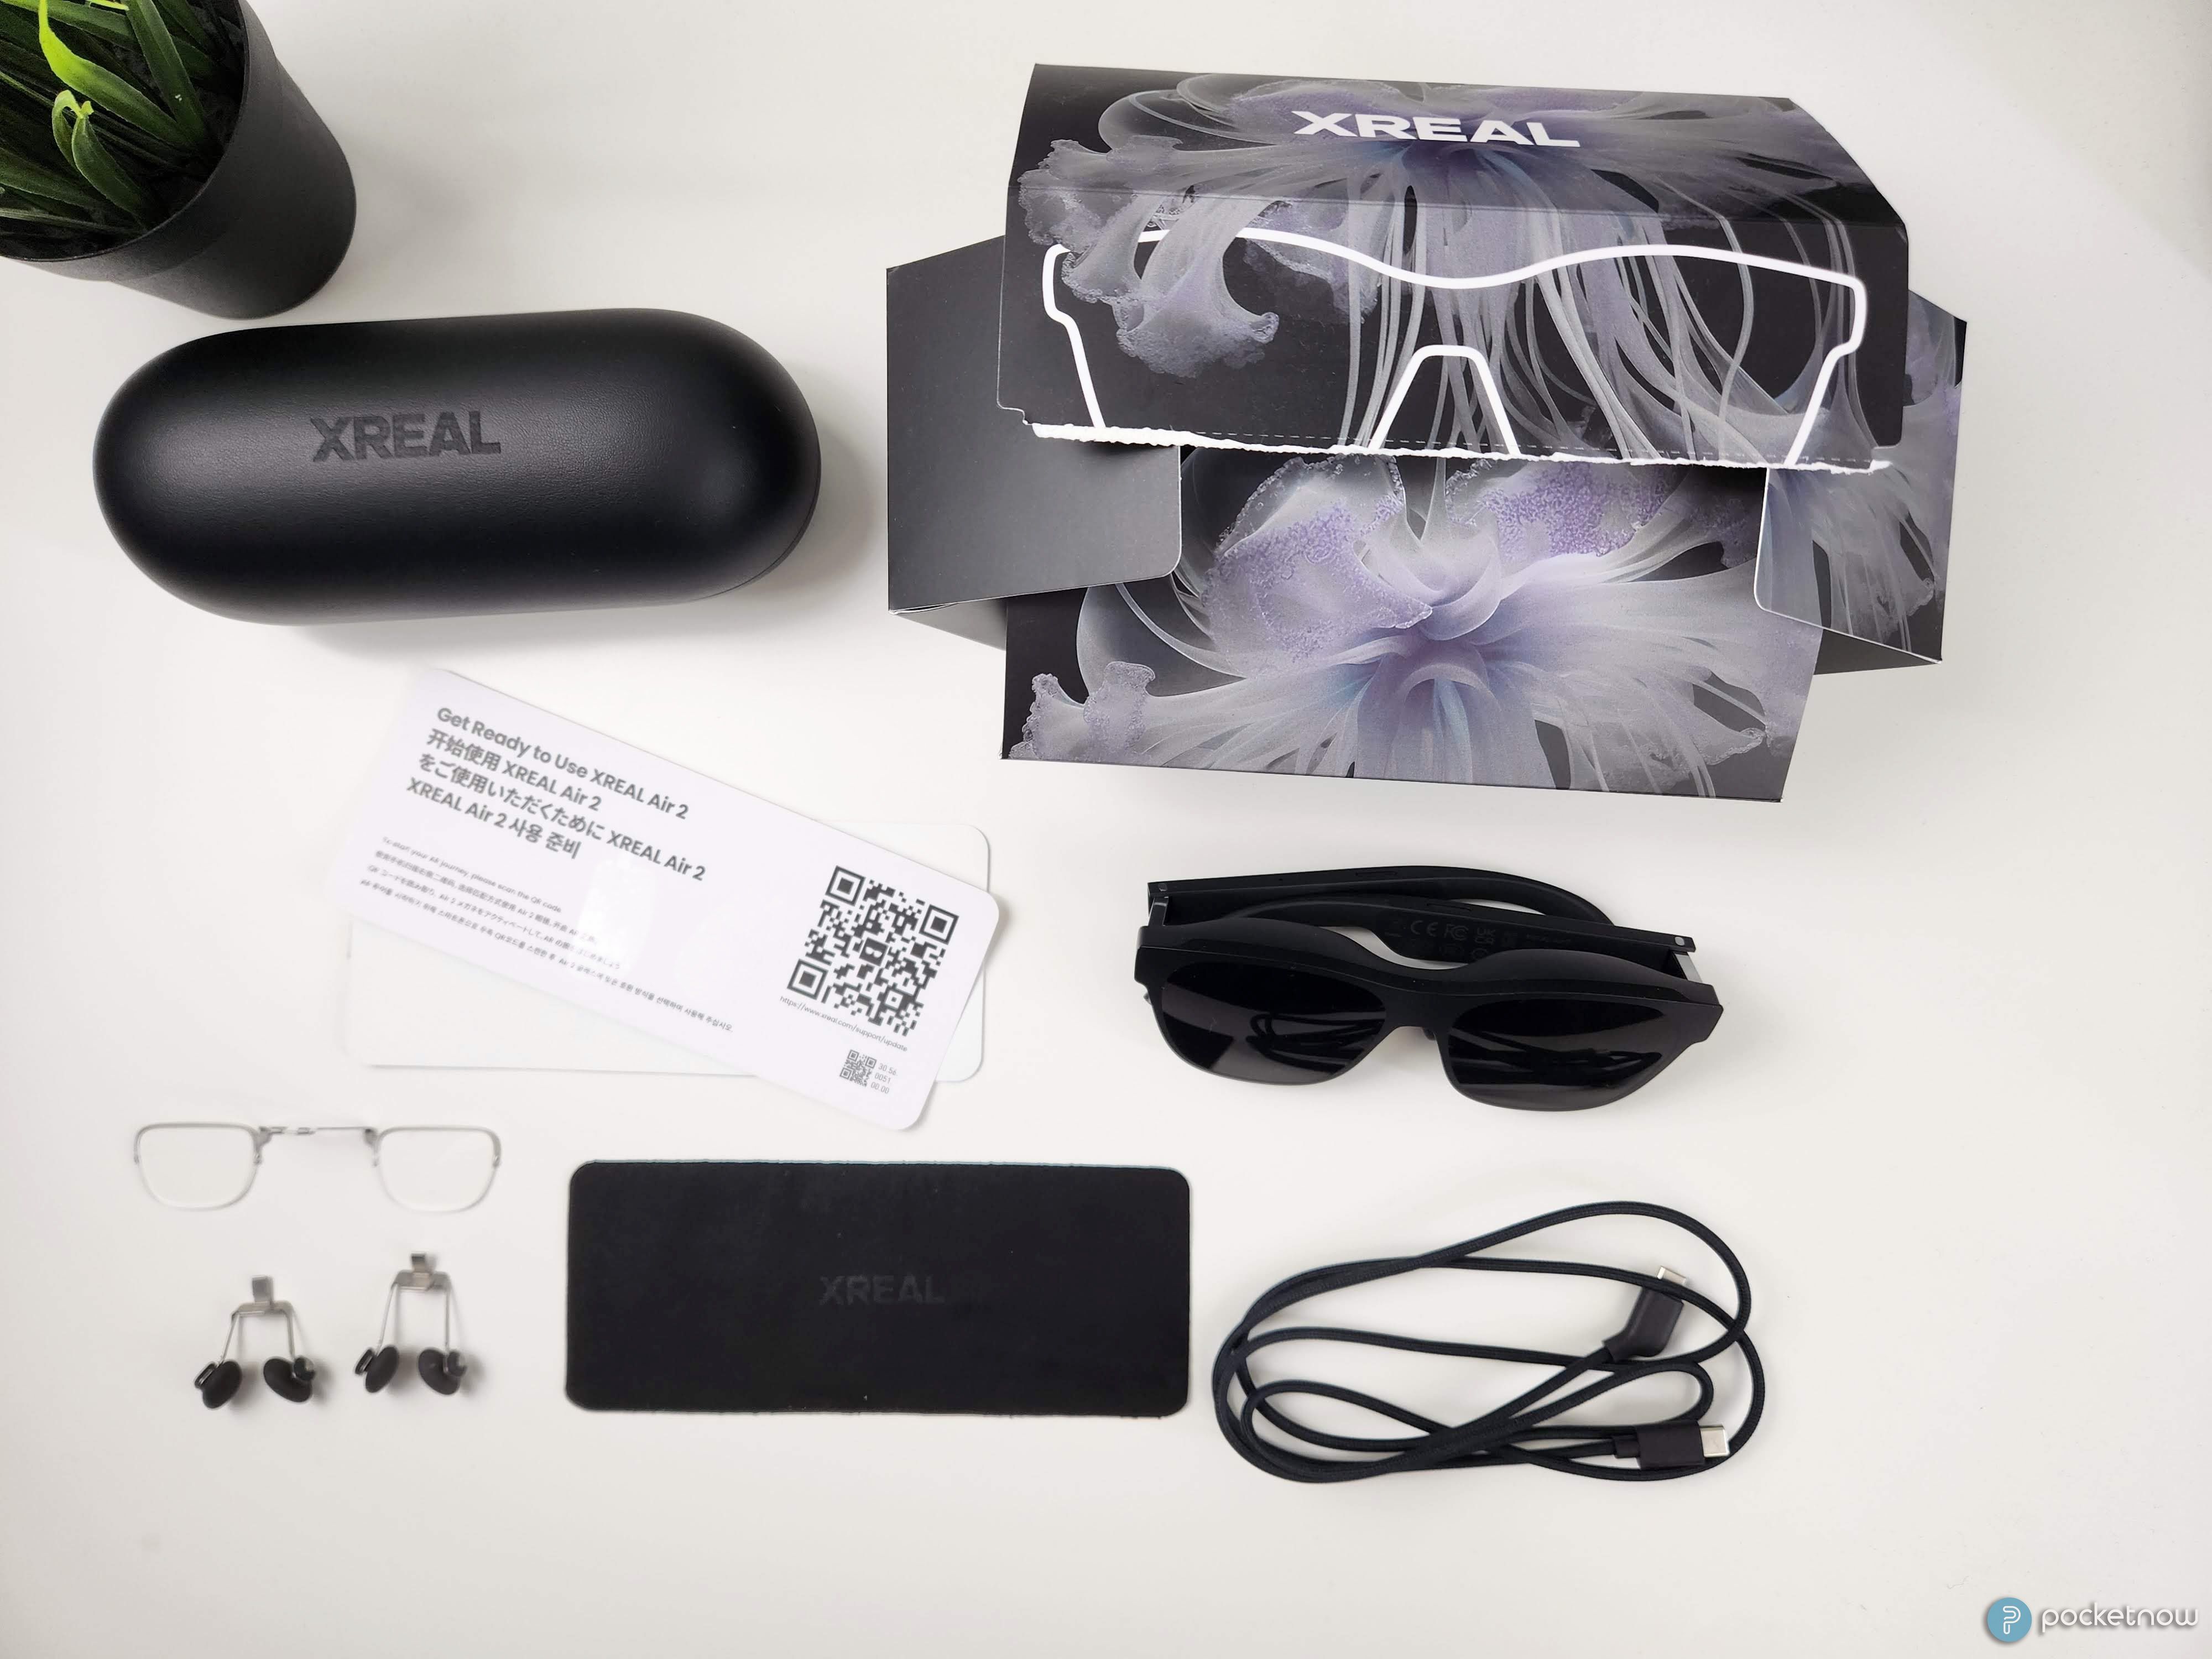 XREAL Air 2 review: A good entry to the world of spatial computing